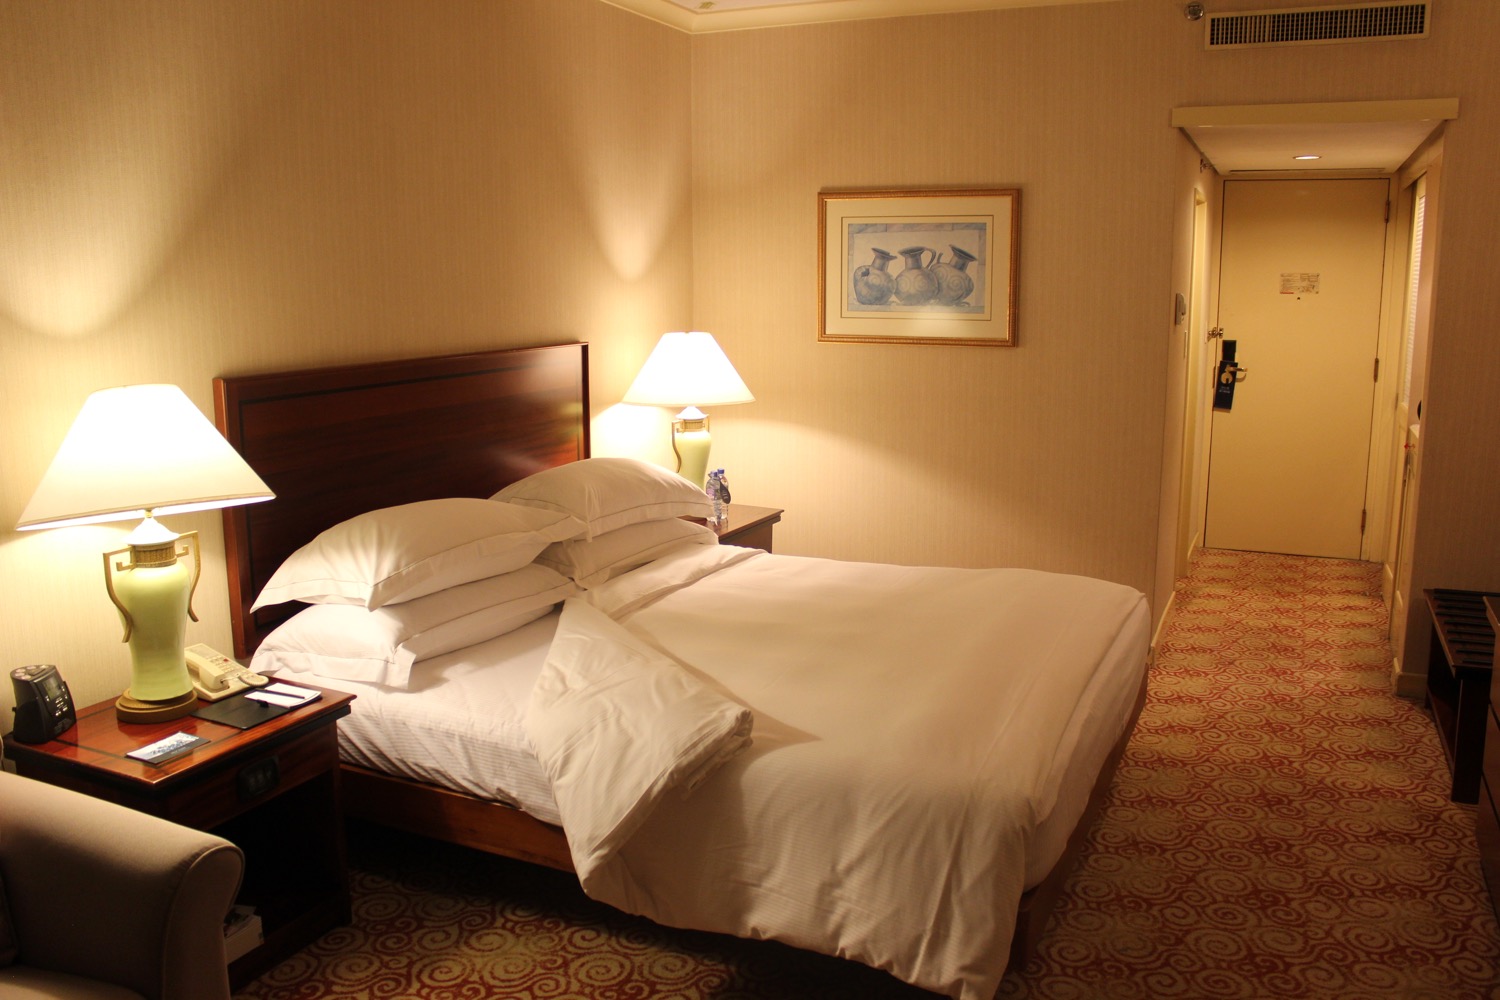 a bed with pillows and lamps in a hotel room